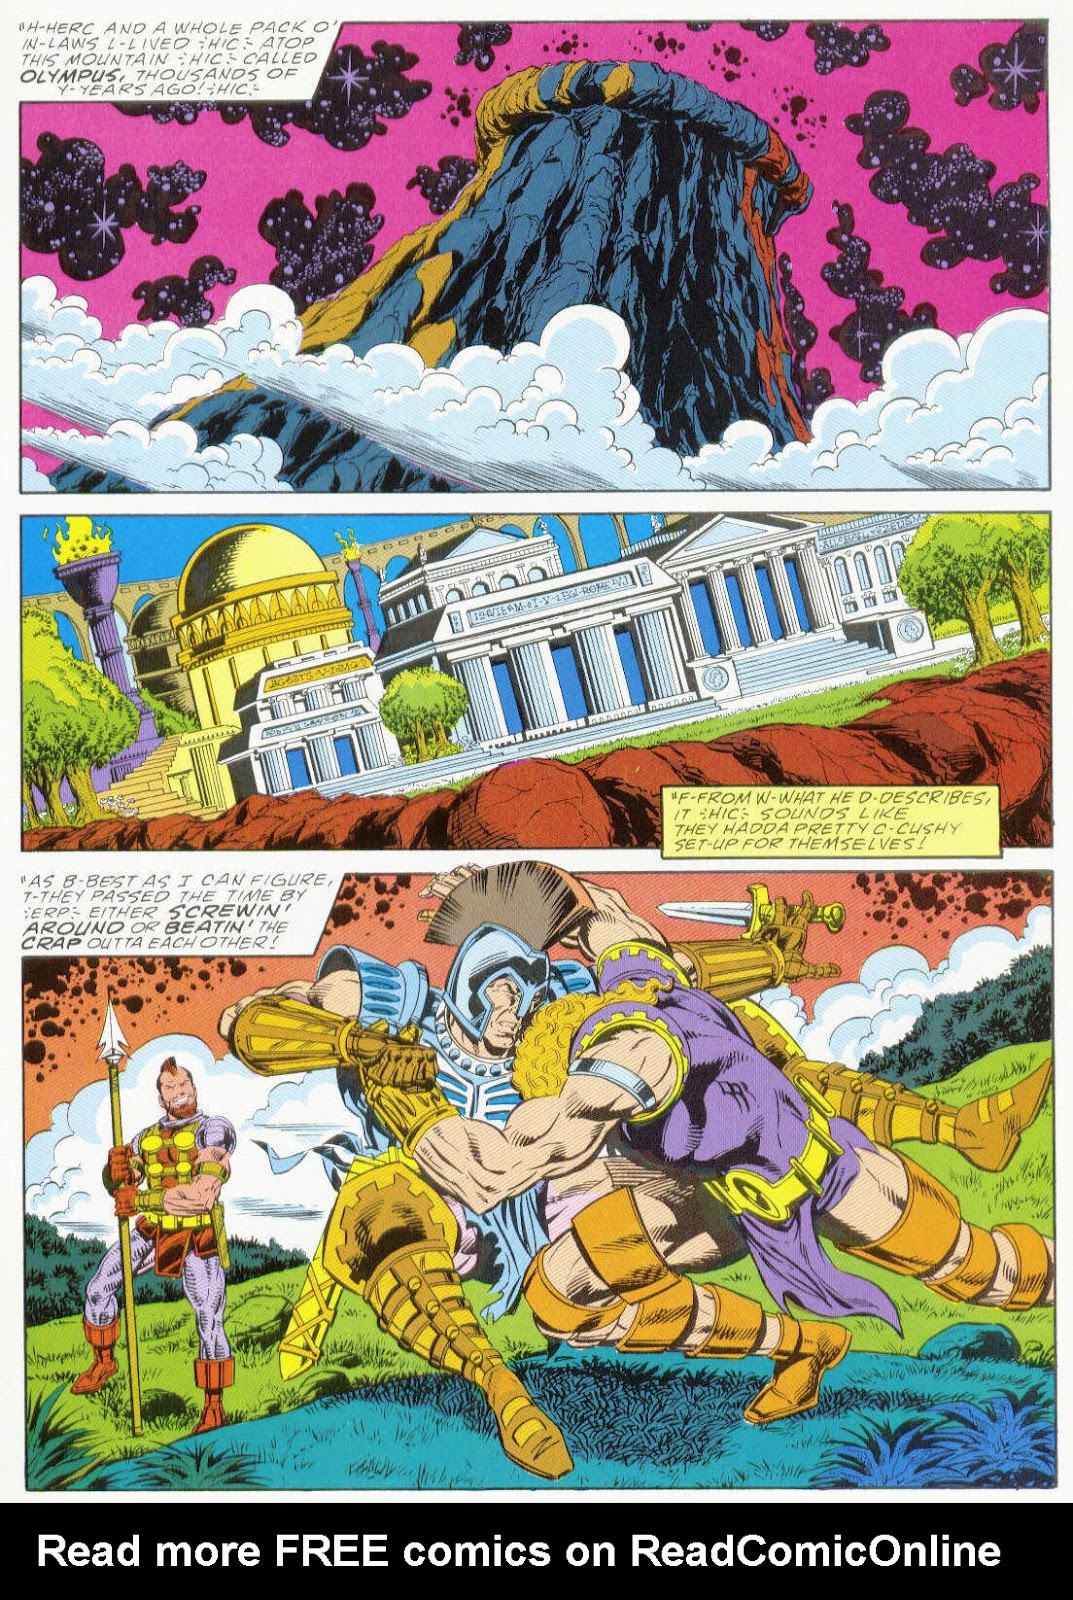 Marvel Graphic Novel issue 37 - Hercules Prince of Power - Full Circle - Page 9